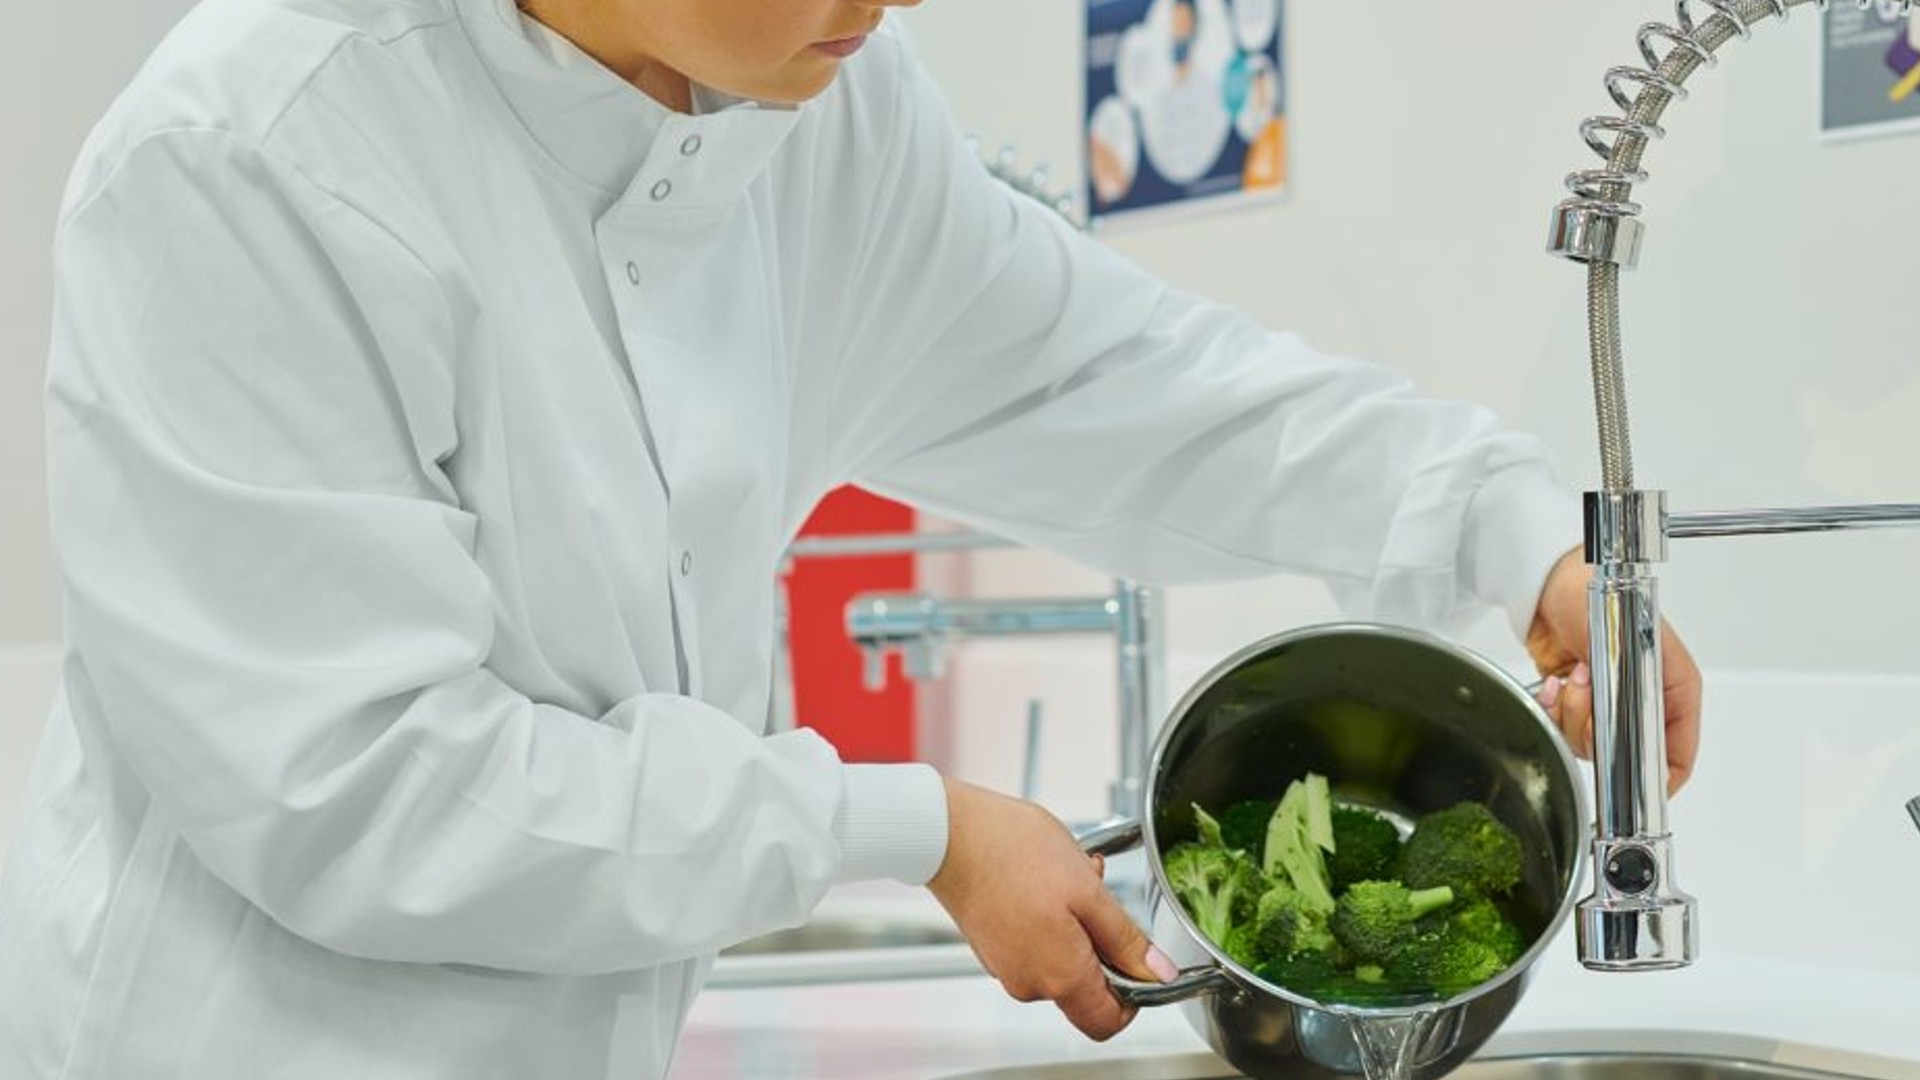 An image of a person washing a pot of vegetables.